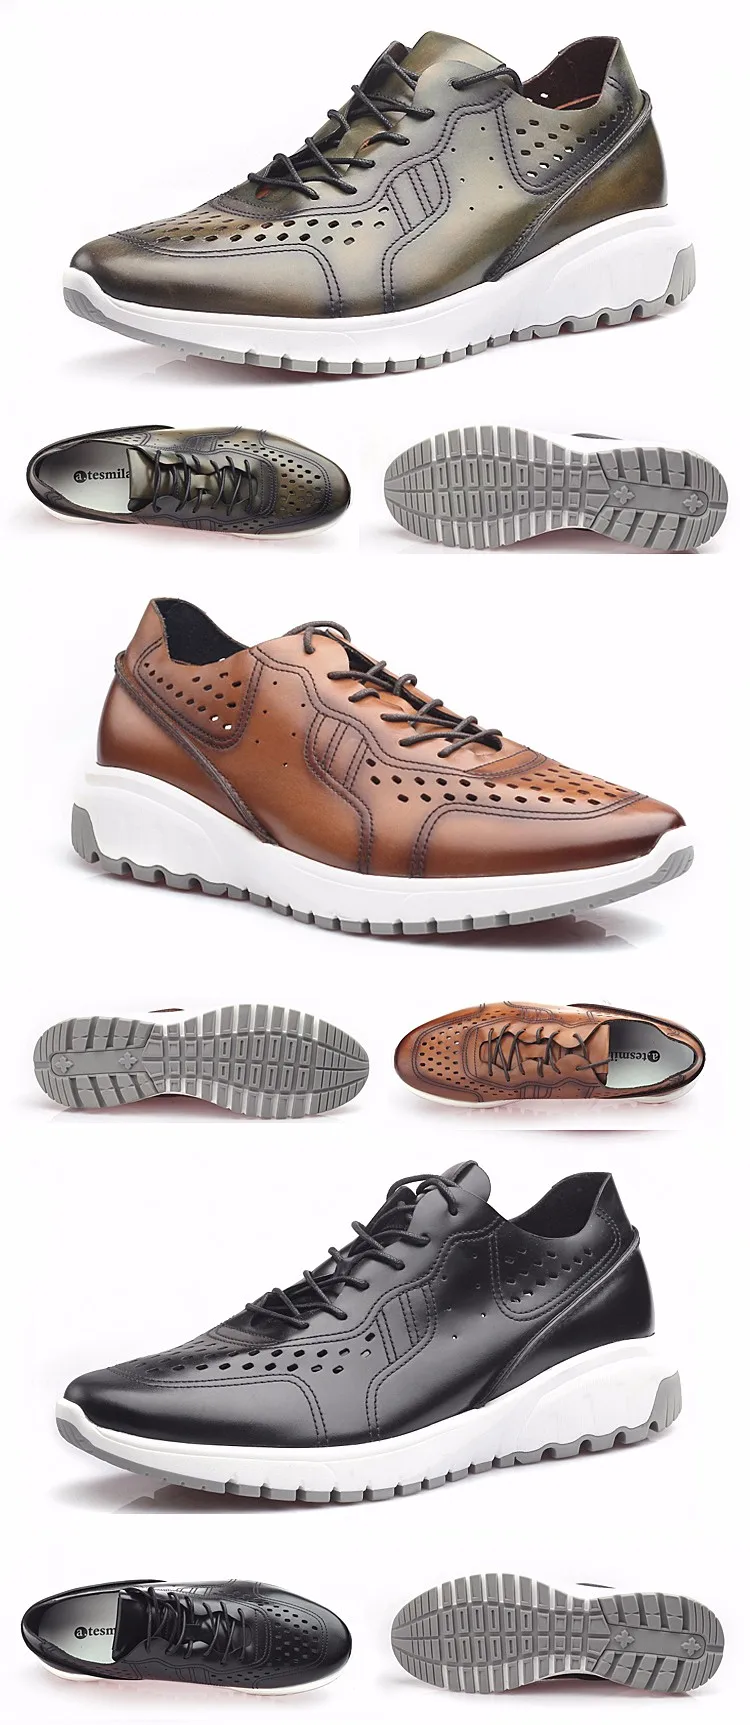 mens leather tennis shoes